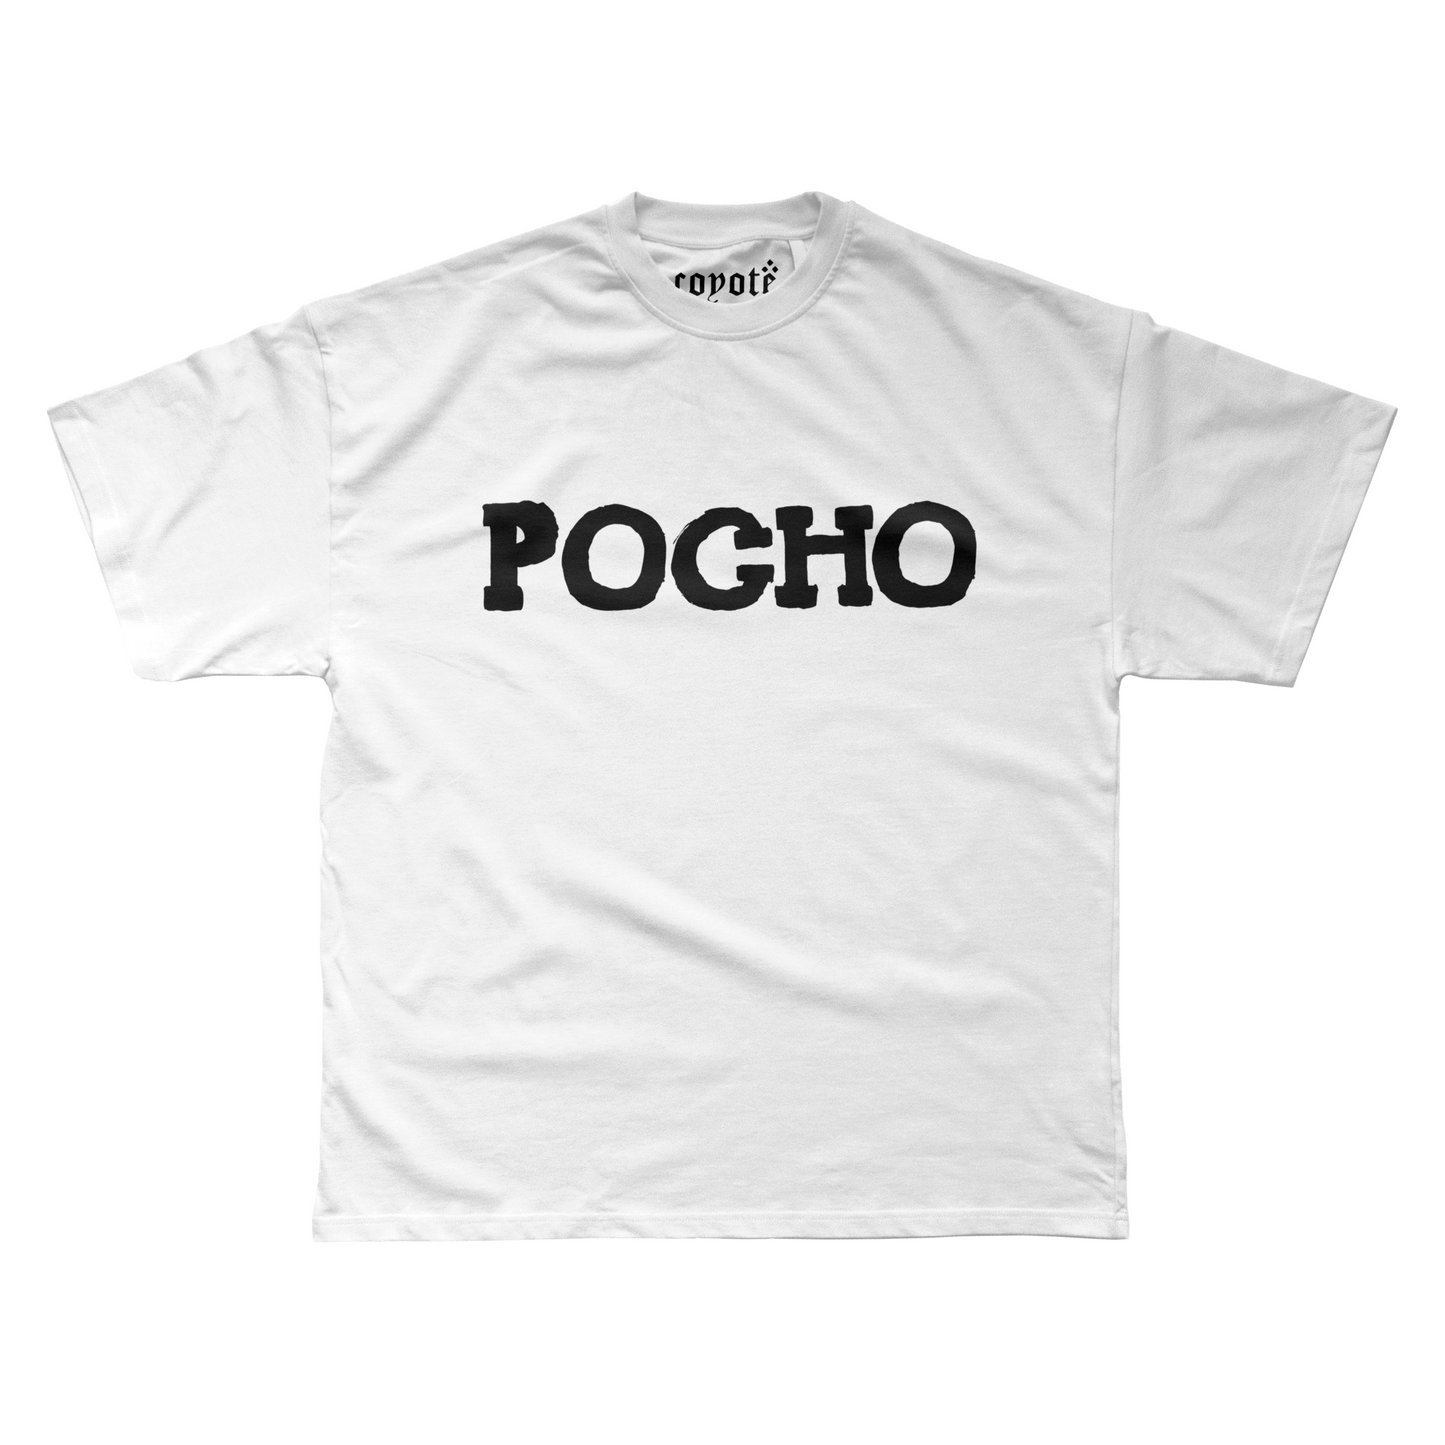 The Official Coyote Pocho Shirt